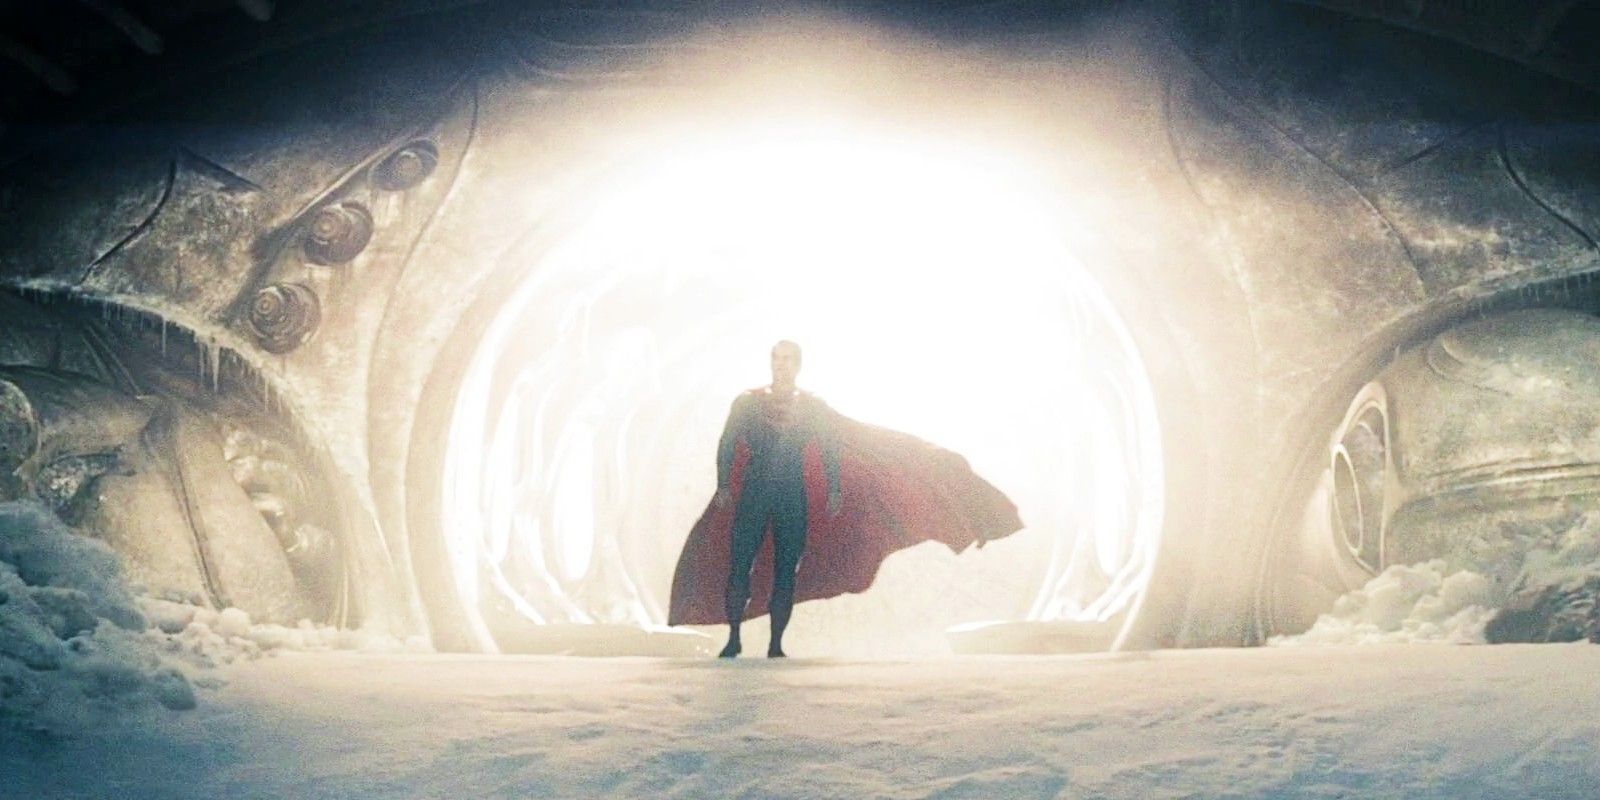 first-superman-movie-set-photo-reveals-snowy-outdoor-filming-location